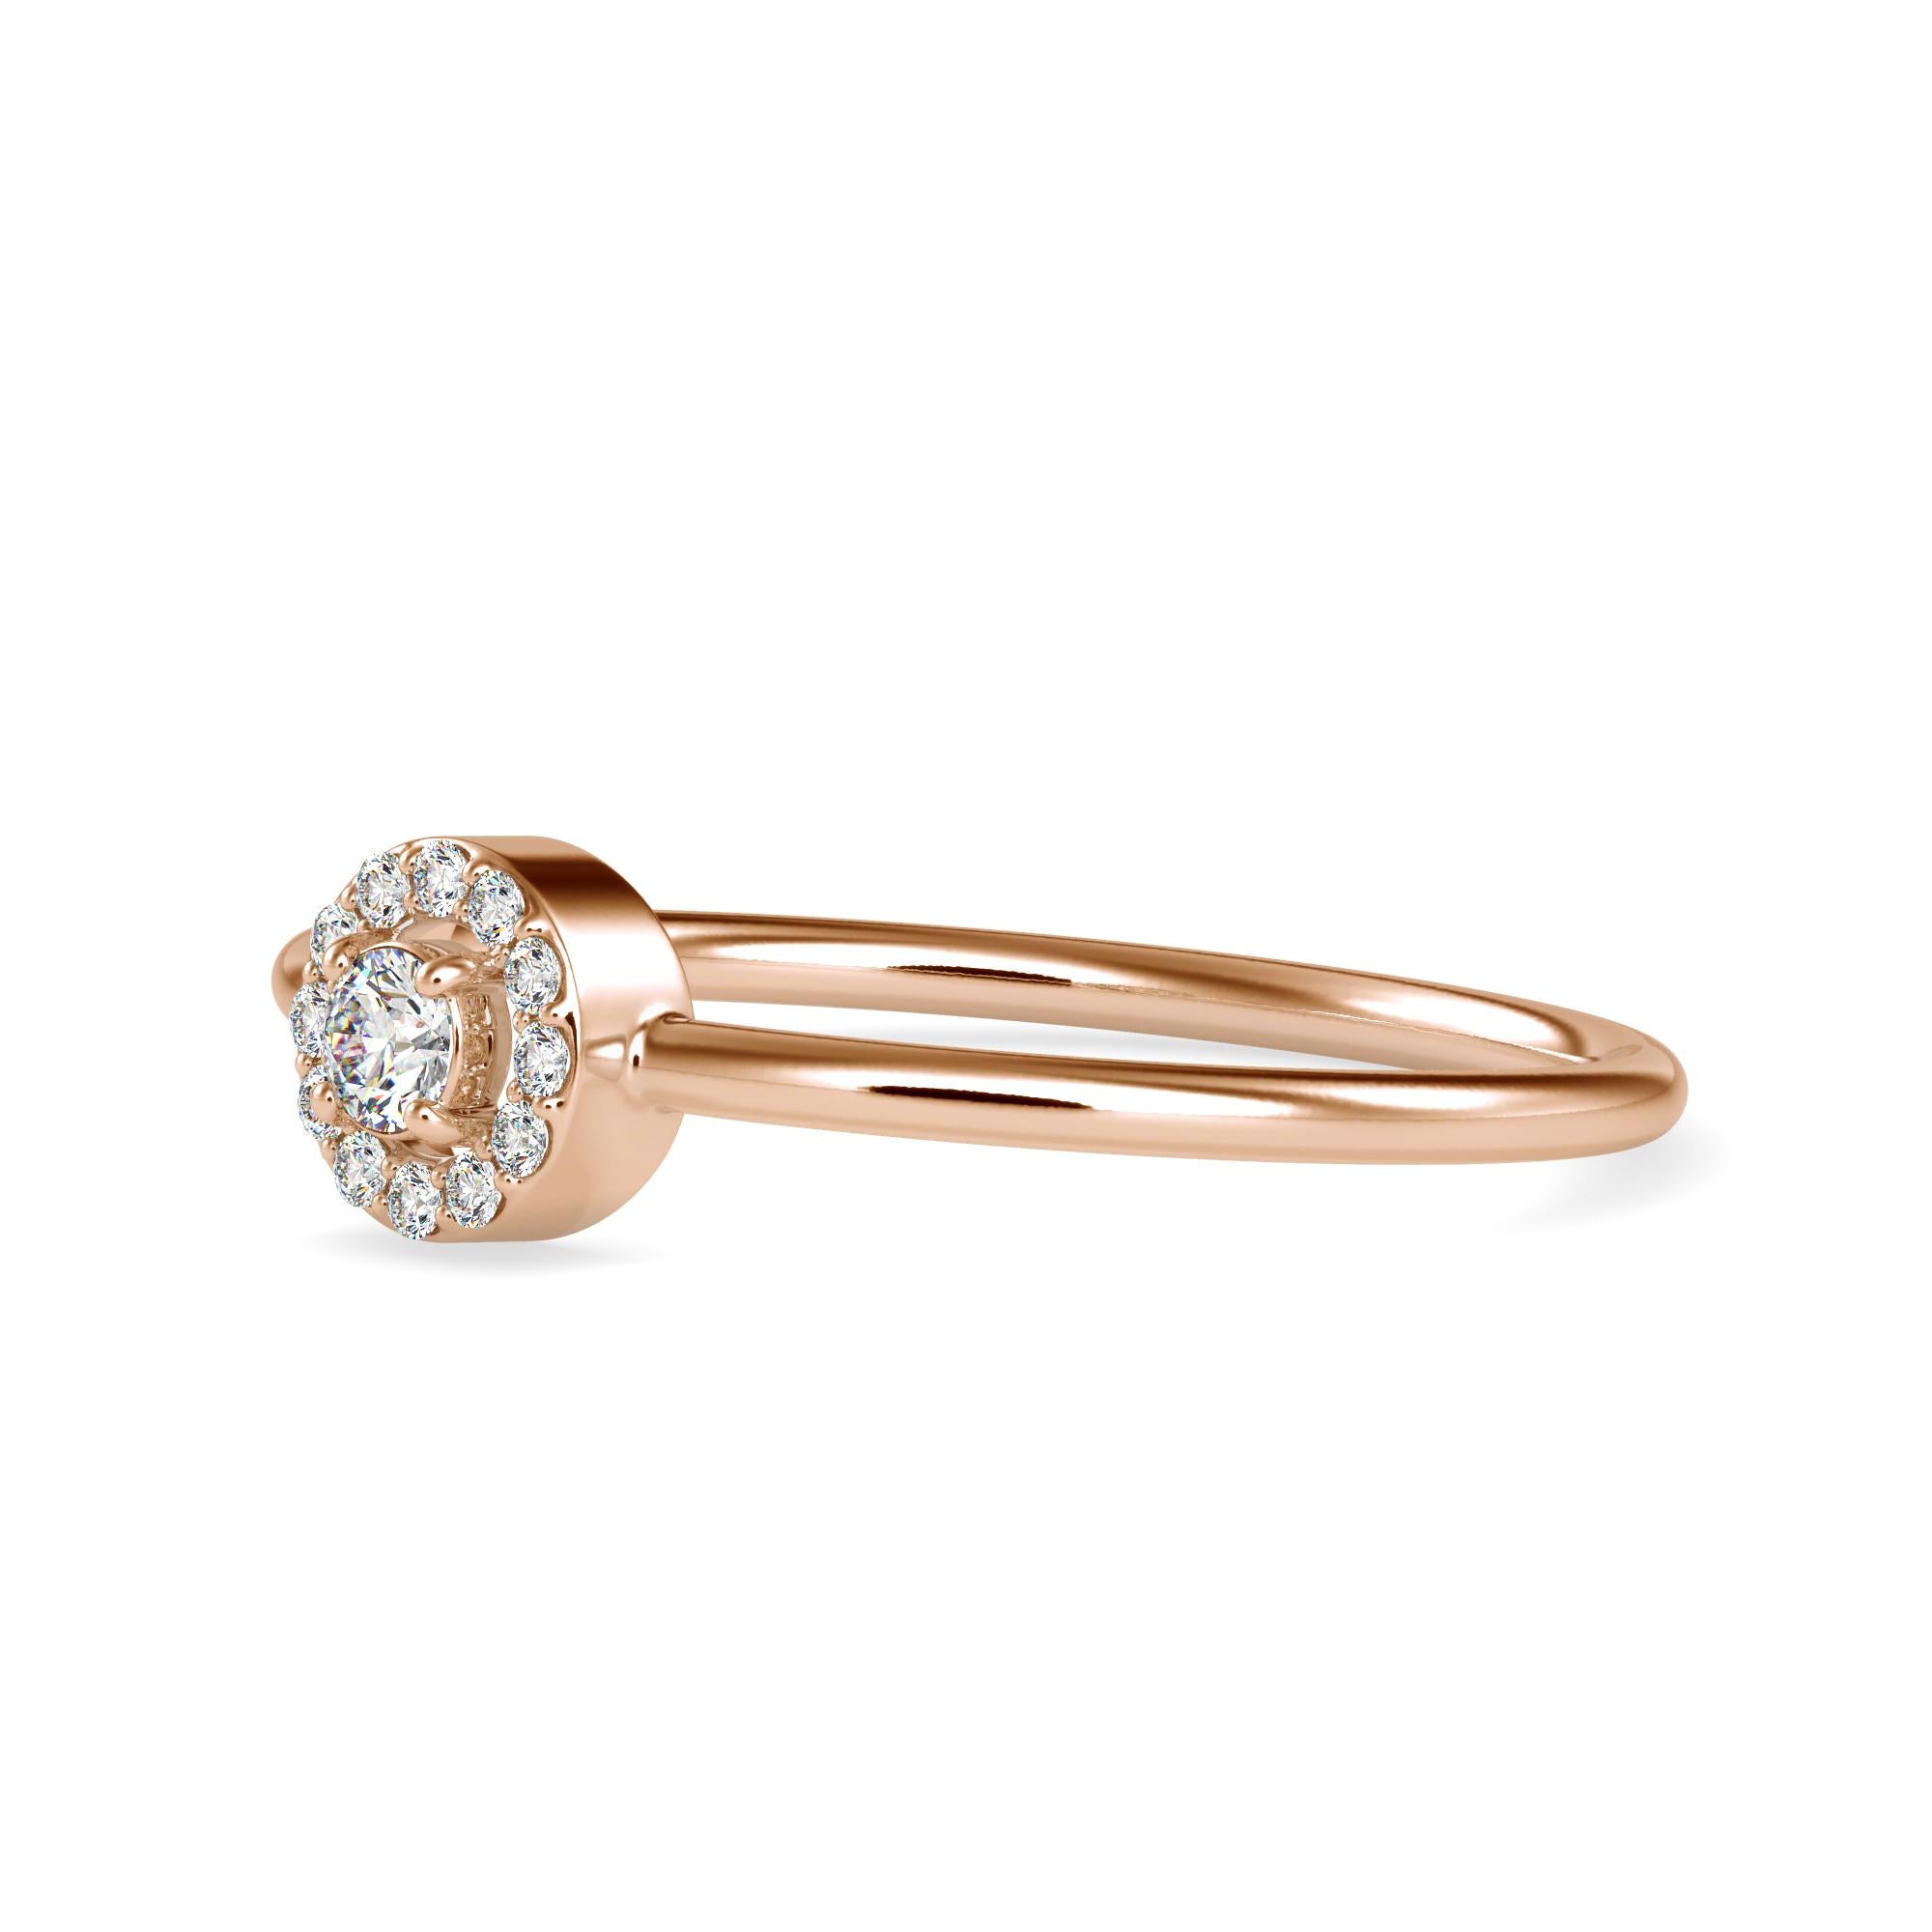 0.11 Carat Diamond 14K Rose Gold Ring
Stamped: 14K 
Total Ring Weight: 1.2 Grams
Center Diamond Weight: 0.06 Carat (F-G Color, VS2-SI1 Clarity) 2.5 Millimeters
Side Diamonds Weight: 0.045 Carat (F-G Color, VS2-SI1 Clarity ), 1.0 Millimeters 
Diamond